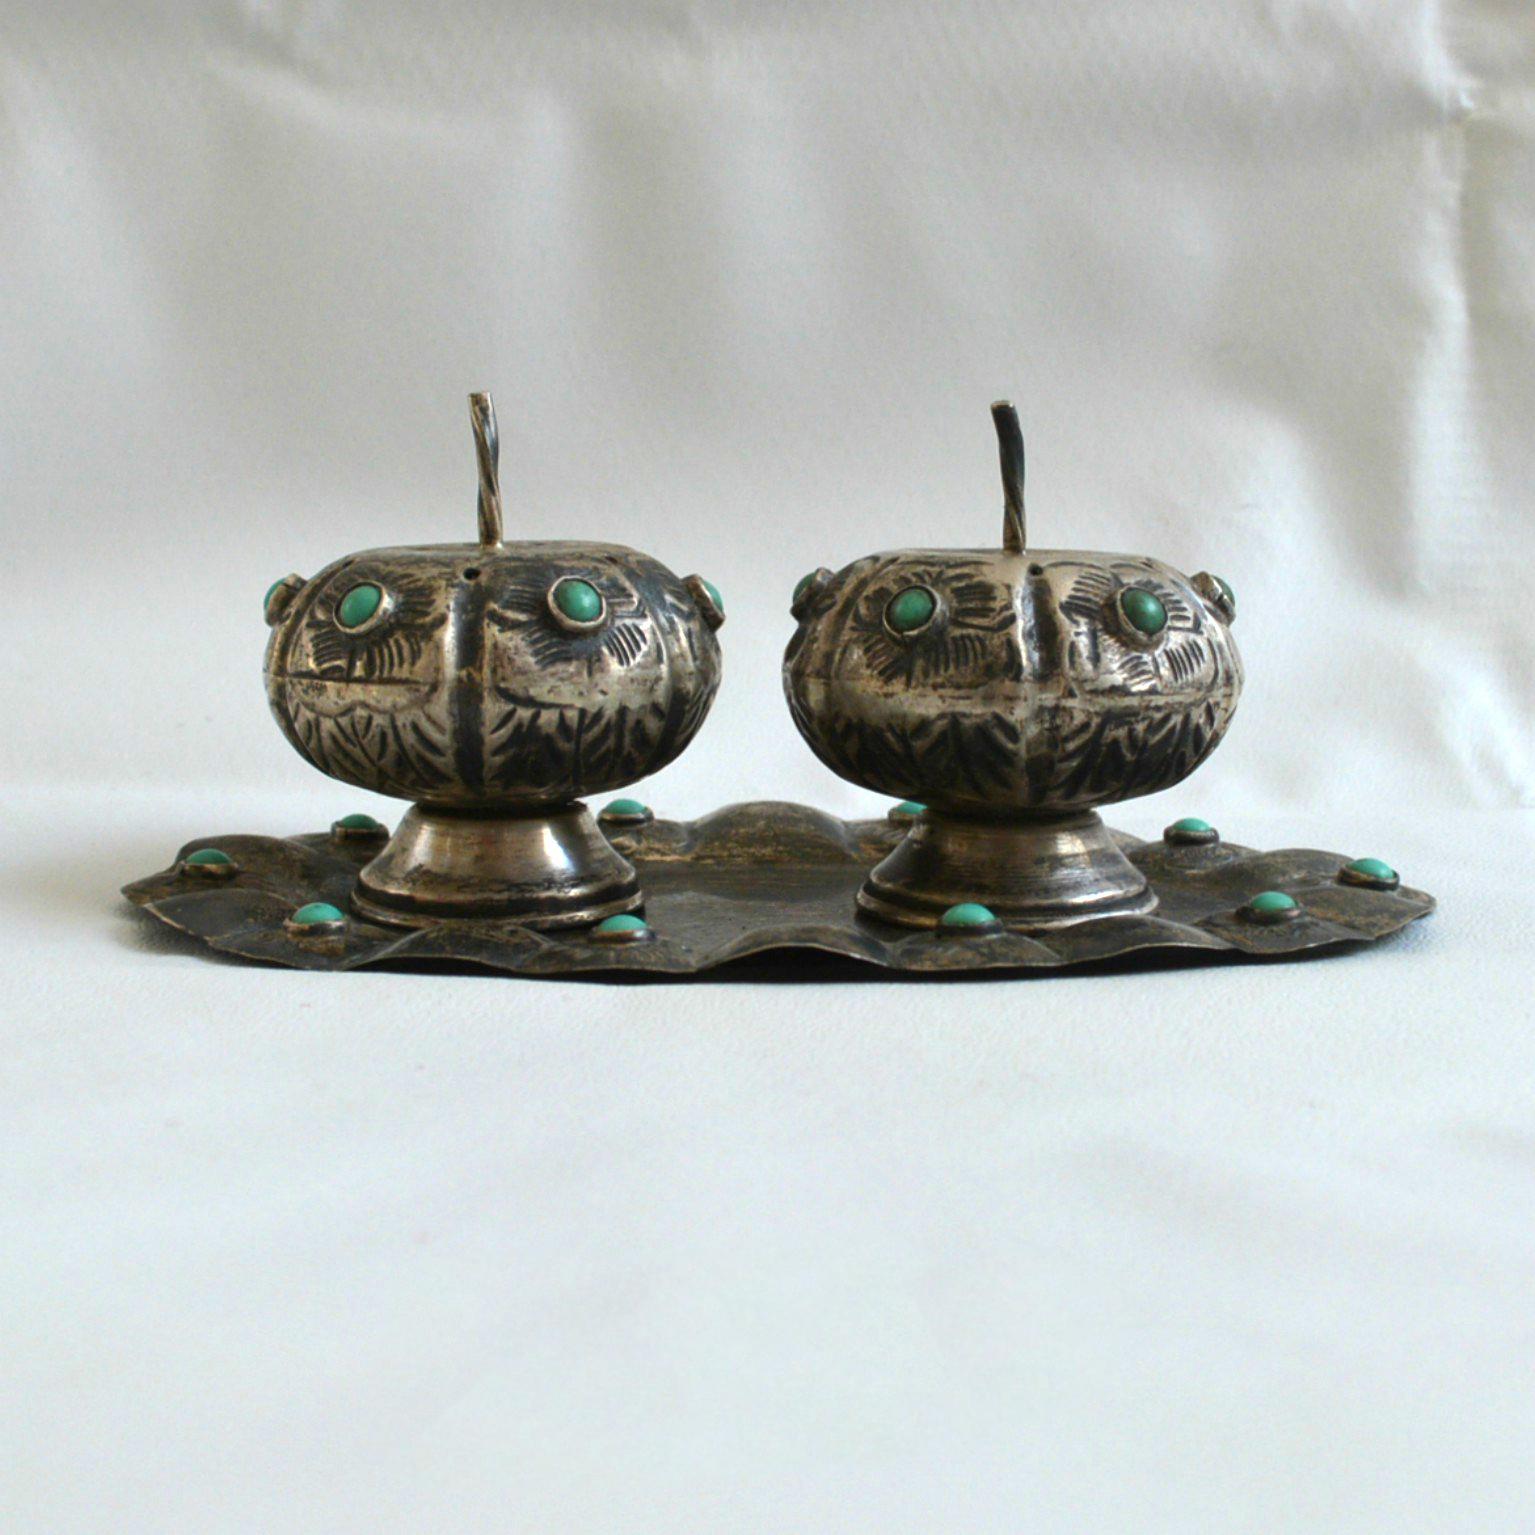 For your consideration a beautiful set sterling silver and turquoise Mexican Modernist salt and pepper shakers APN.

Original unrestored patina.

Plate 5" x 3", Shakers 2" height x 1 3/4" diameter.

